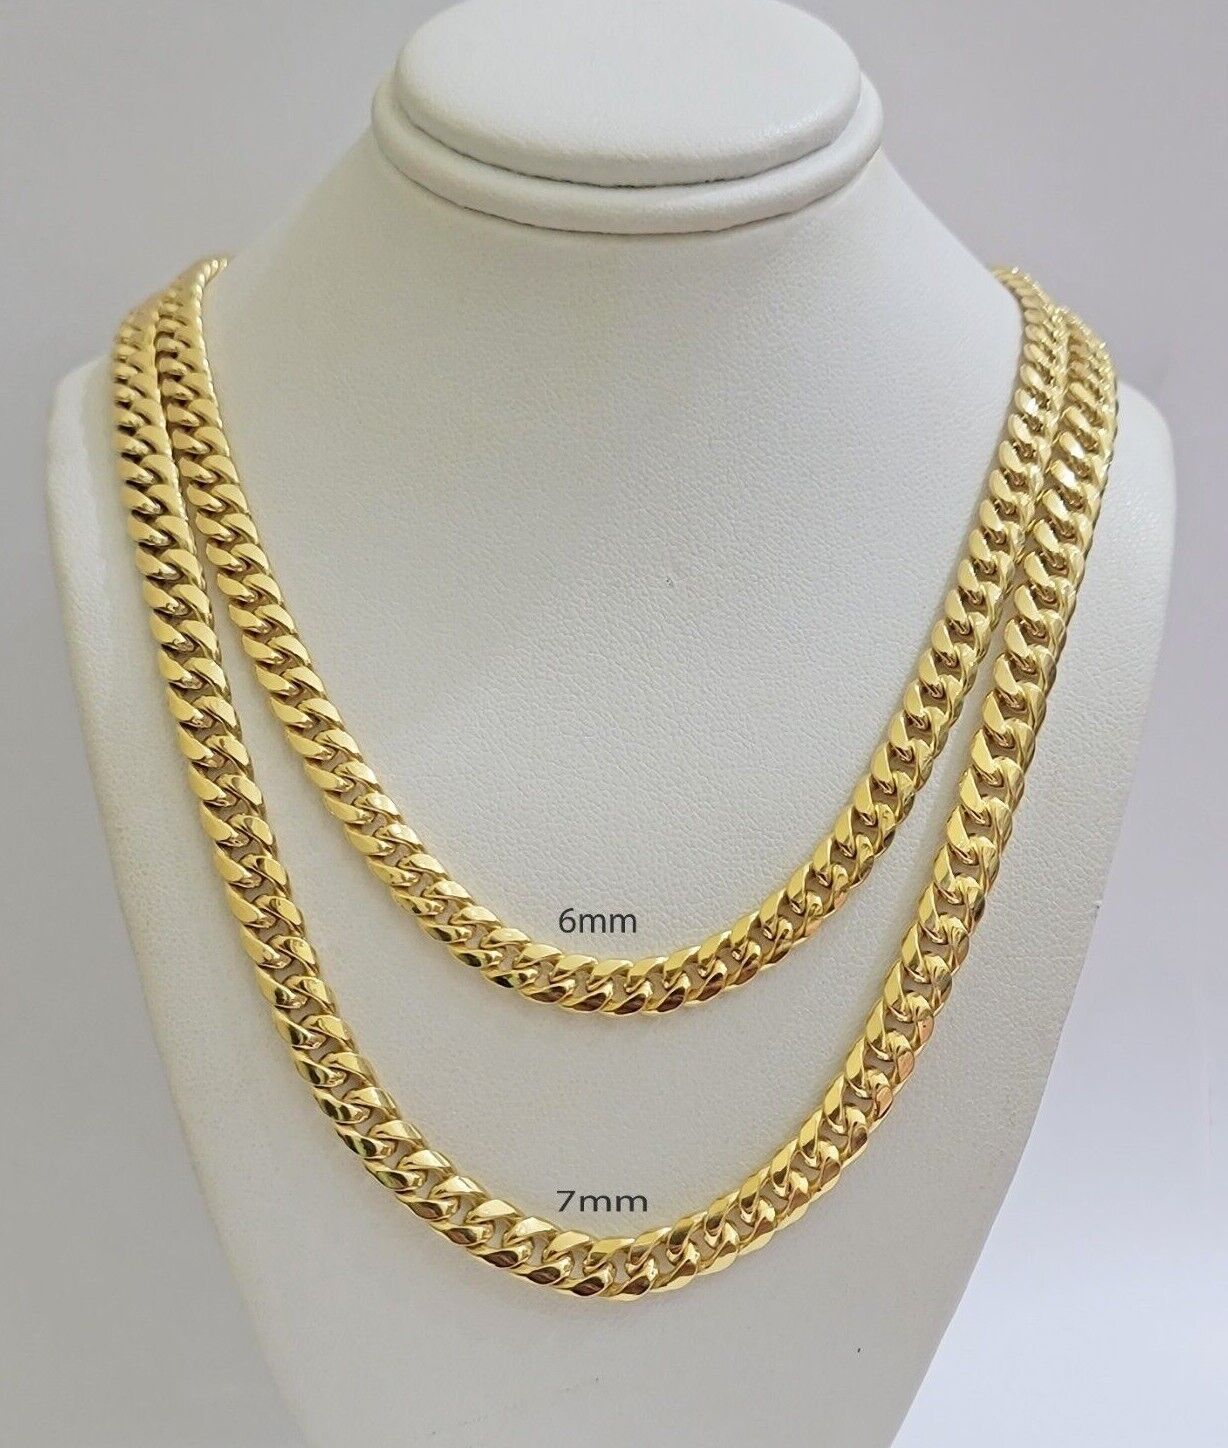 10k Yellow Gold Chain necklace Miami Cuban Link 6mm 7mm 18-28 Inch LIMITED TIME